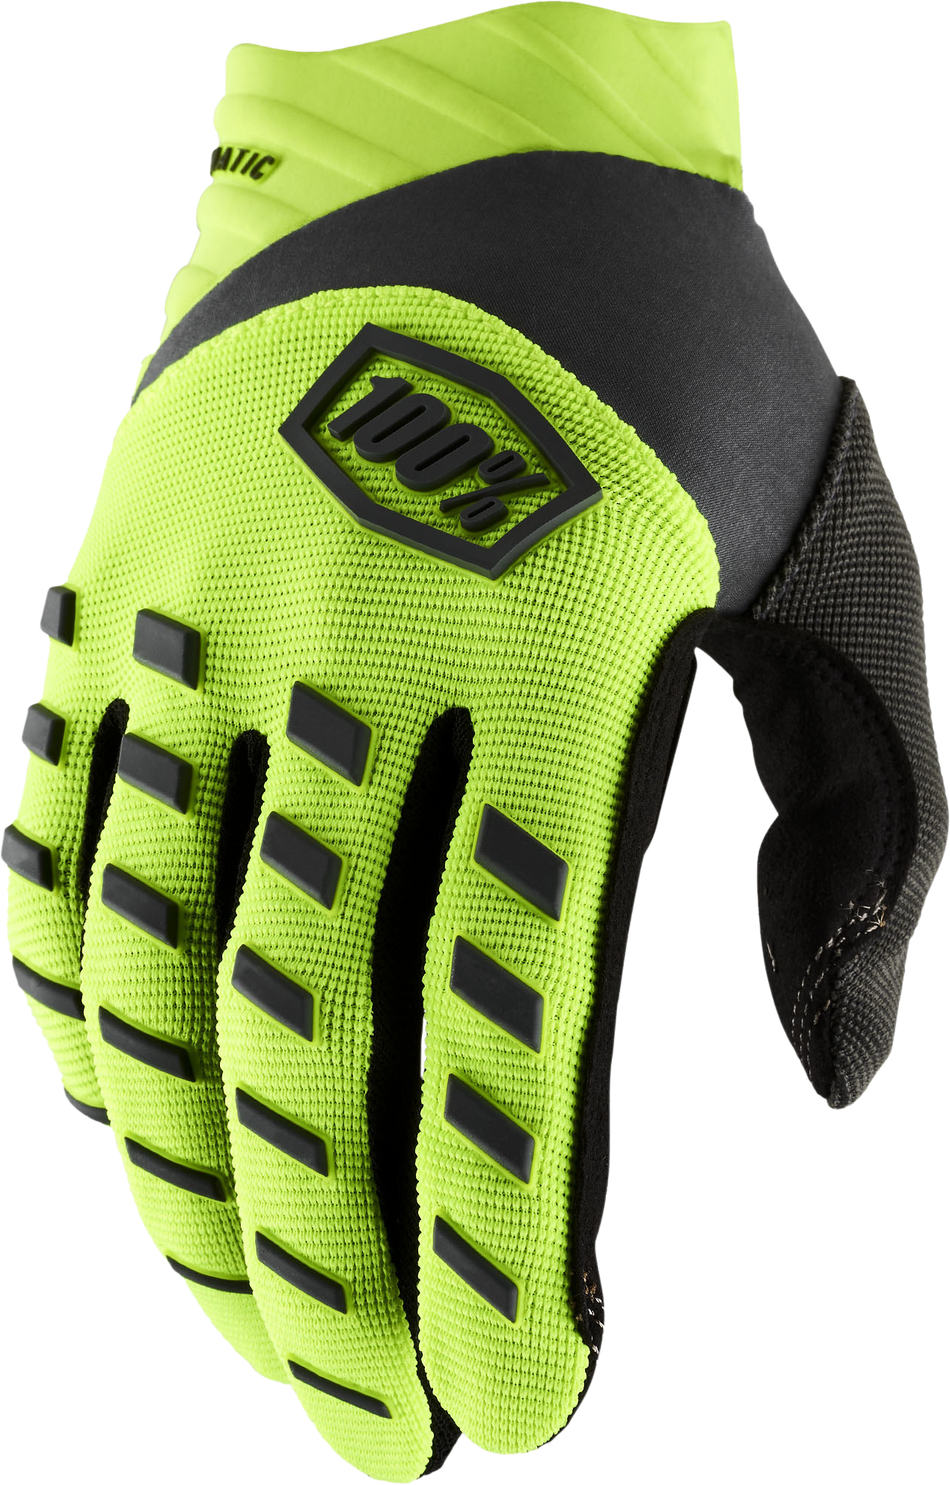 100% Airmatic Gloves Fluo Yellow/Black Md 10000-00011